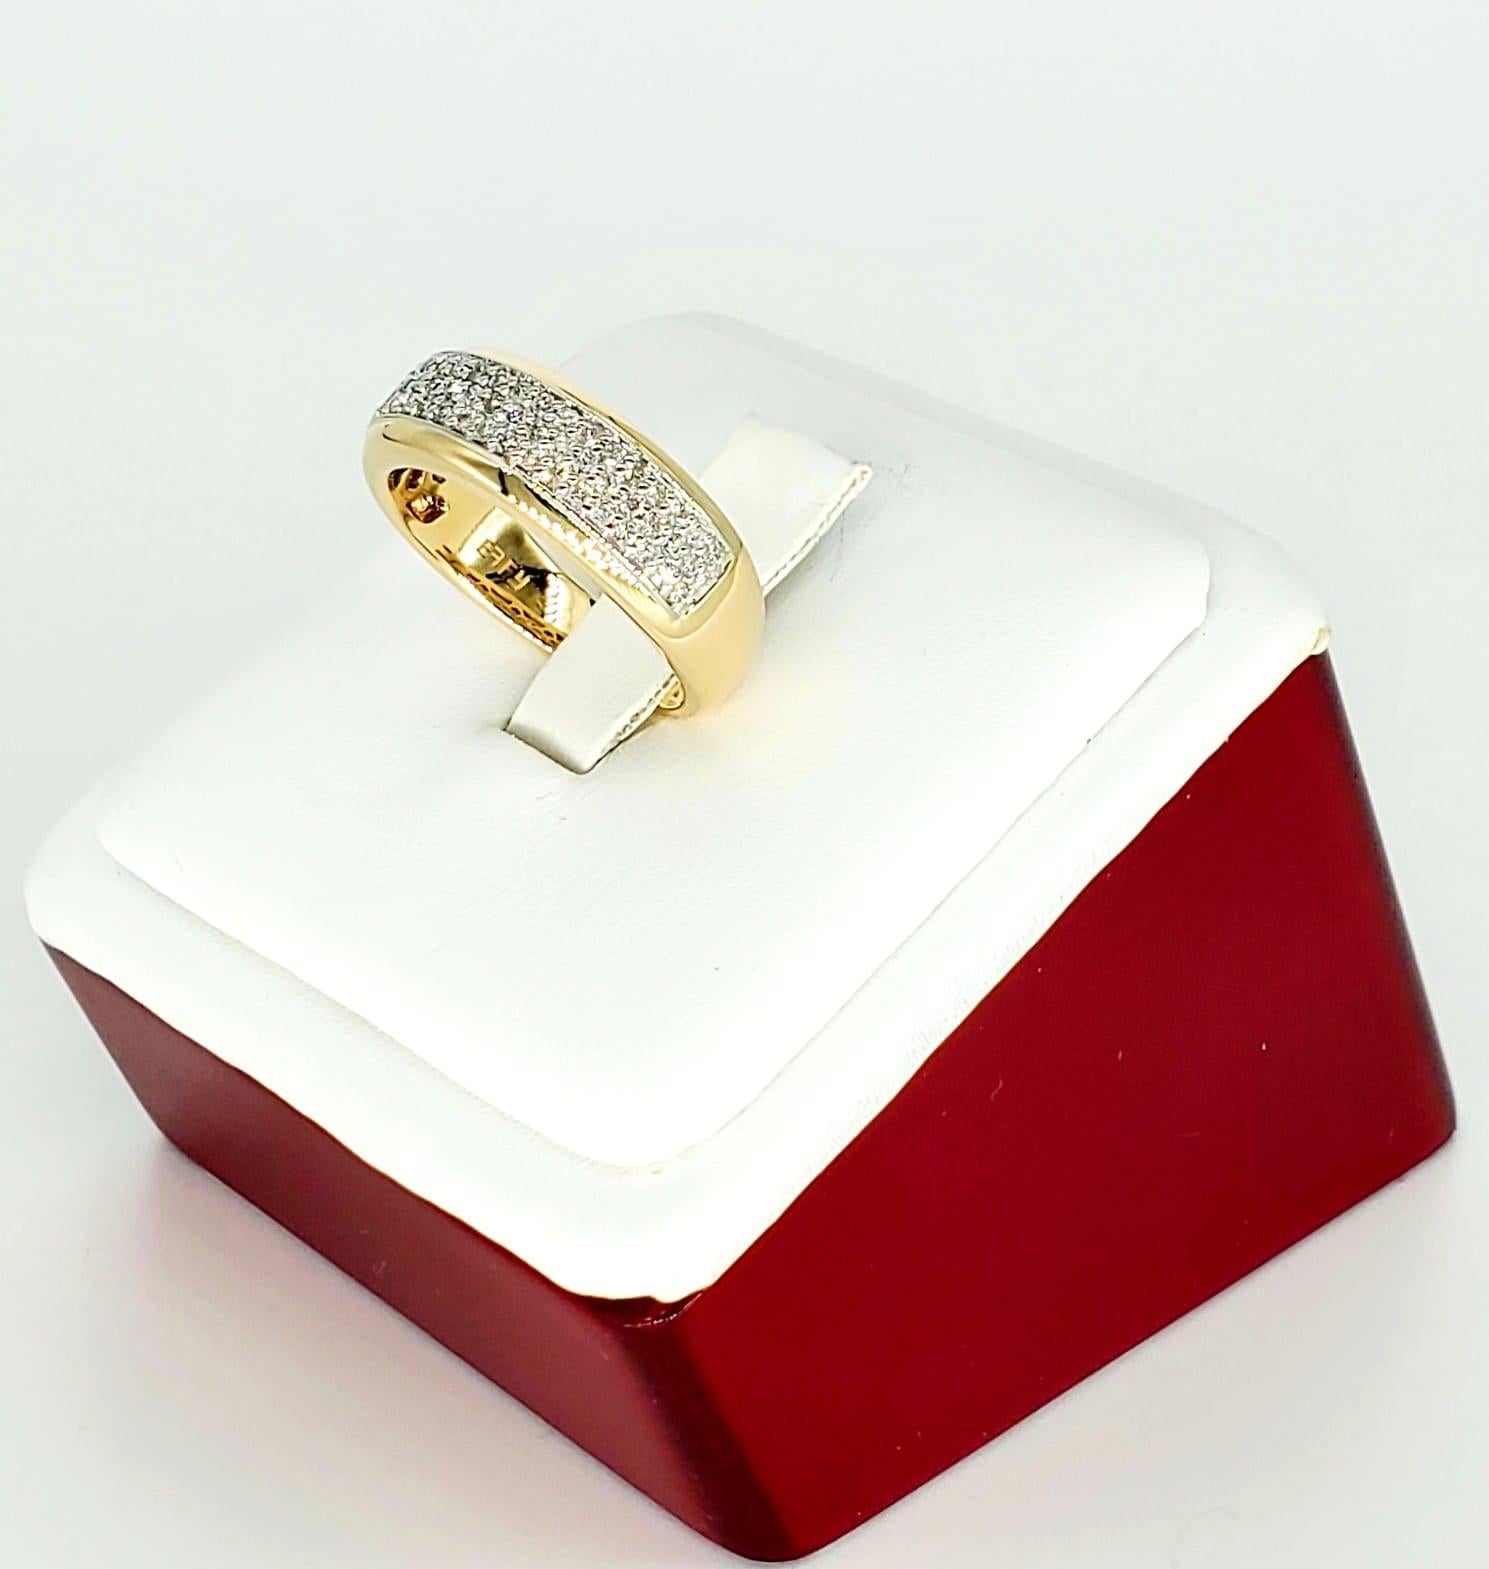 EFFY 1.00 Carat Diamond Encrusted Band Ring 14 Karat Gold In Excellent Condition For Sale In Miami, FL